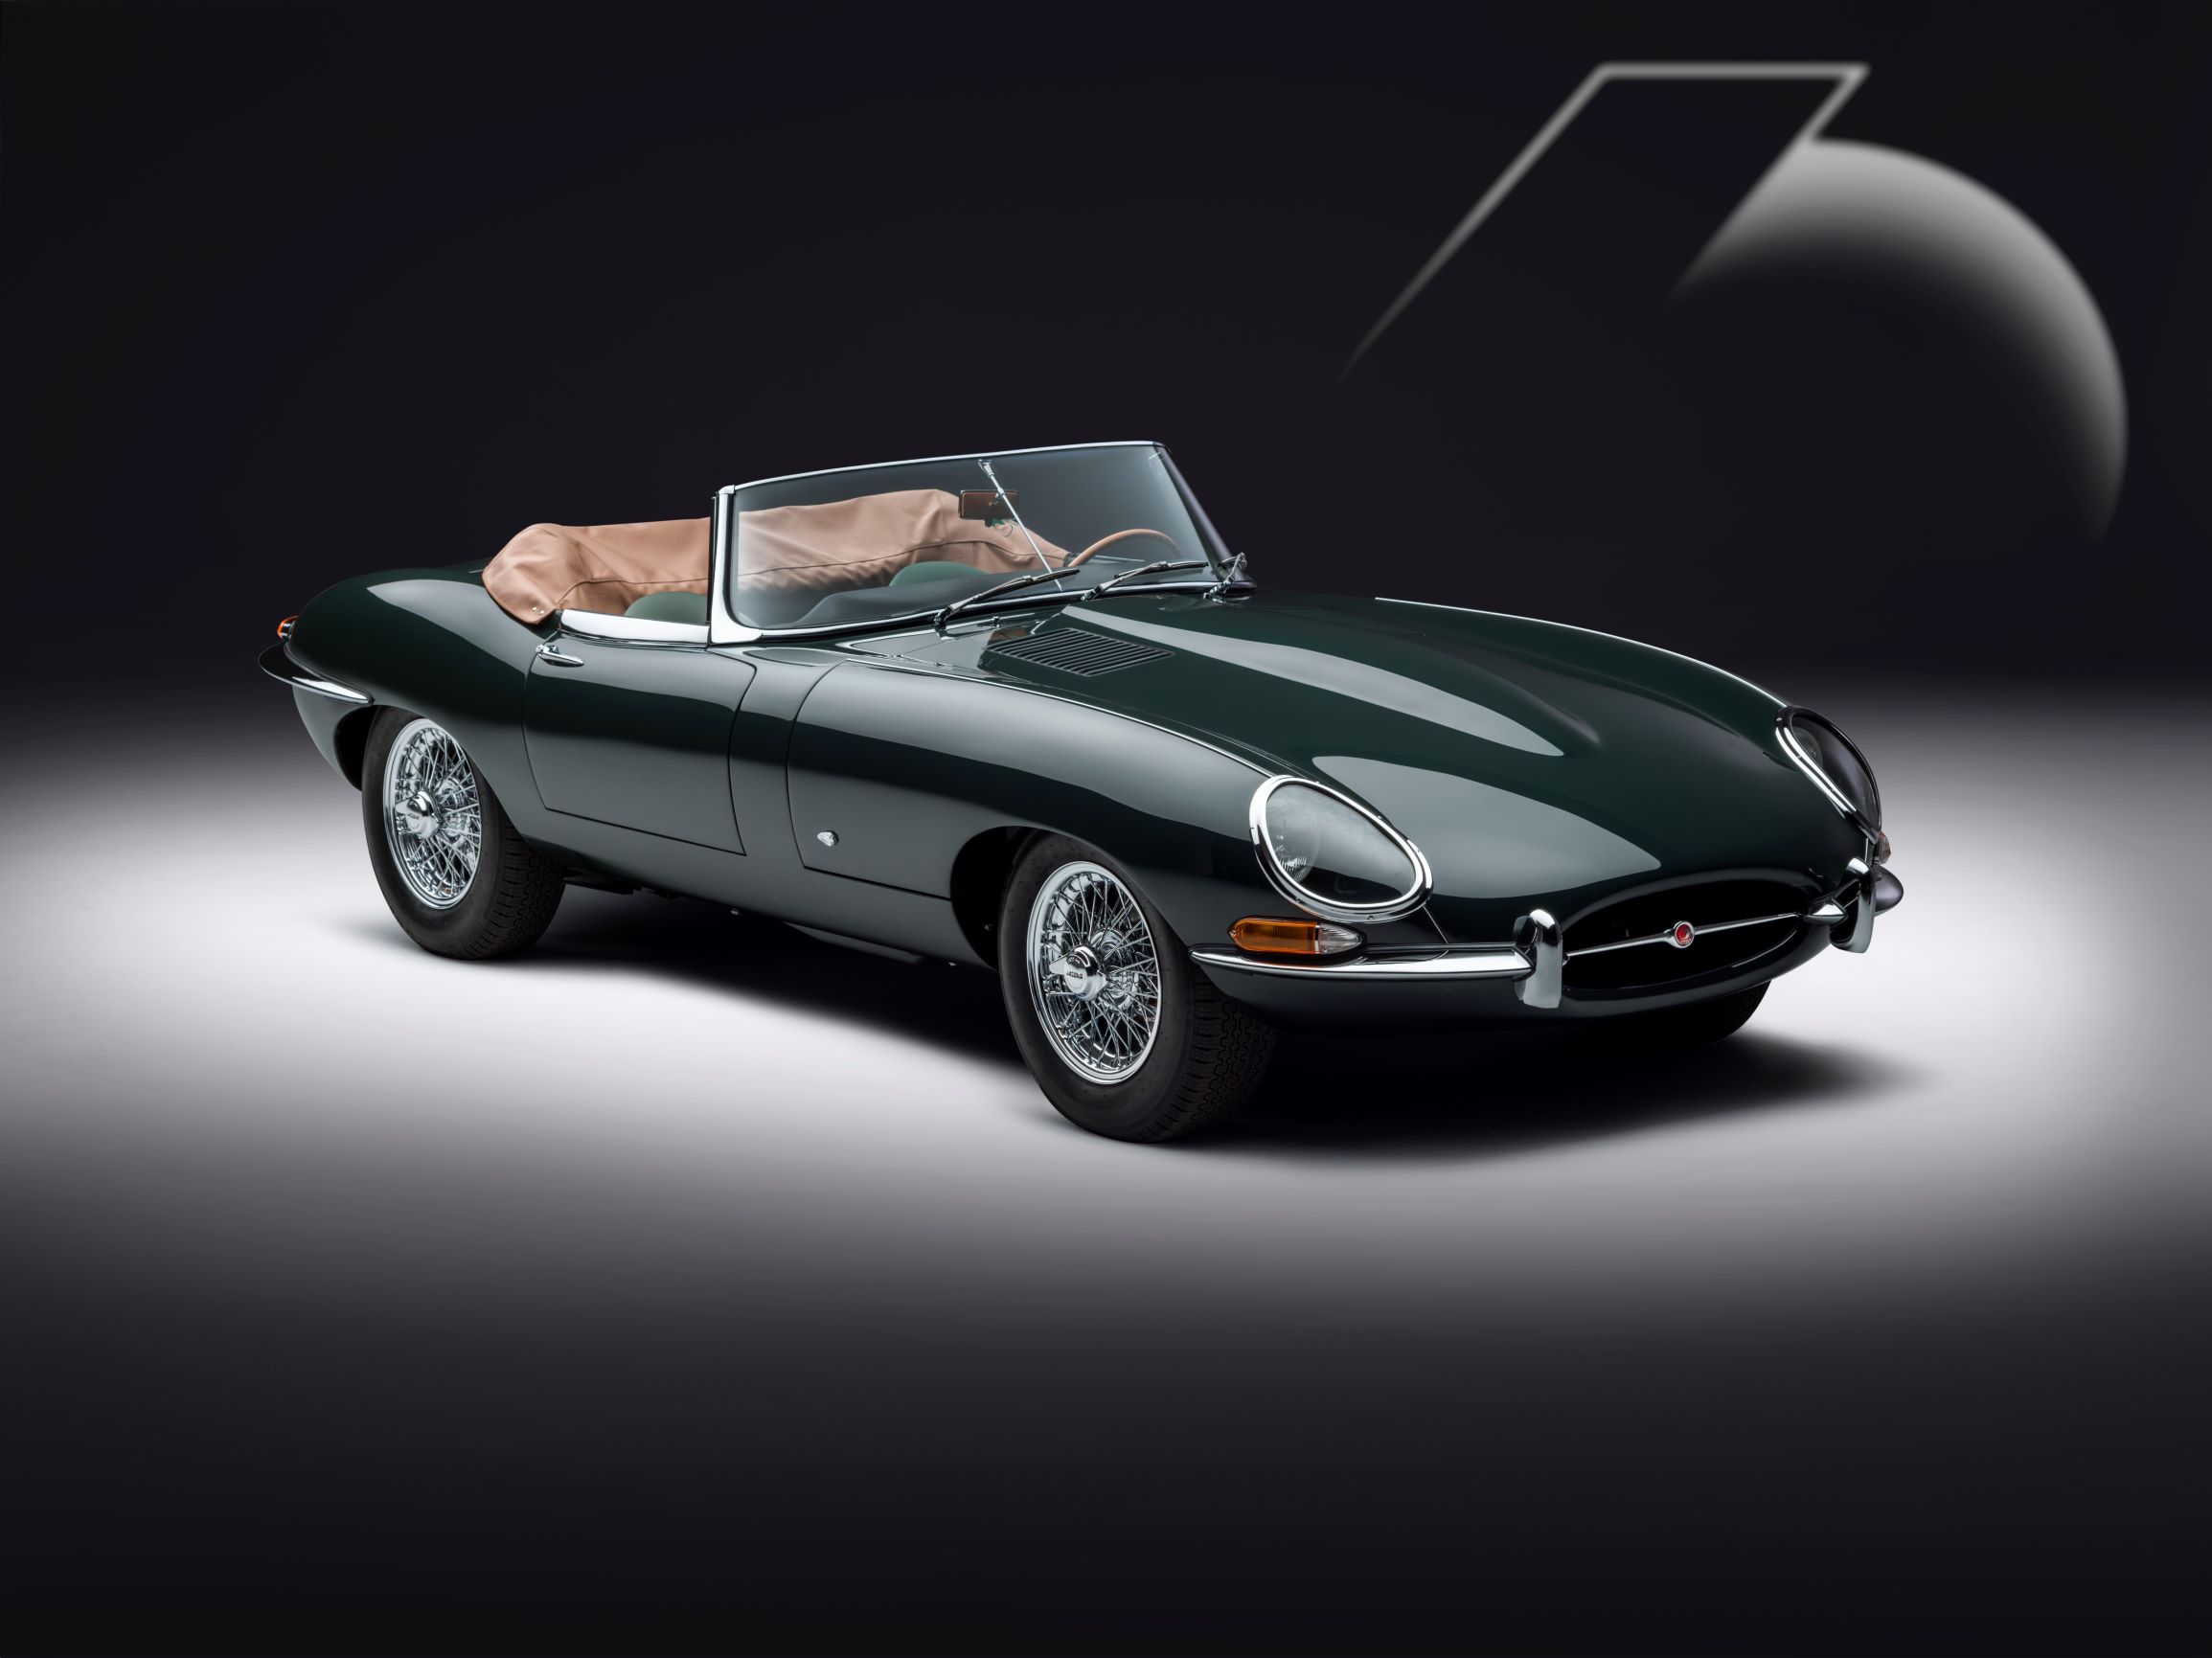 Jaguar Relives Its Past With a Perfect Recreation of the Racing E-Type